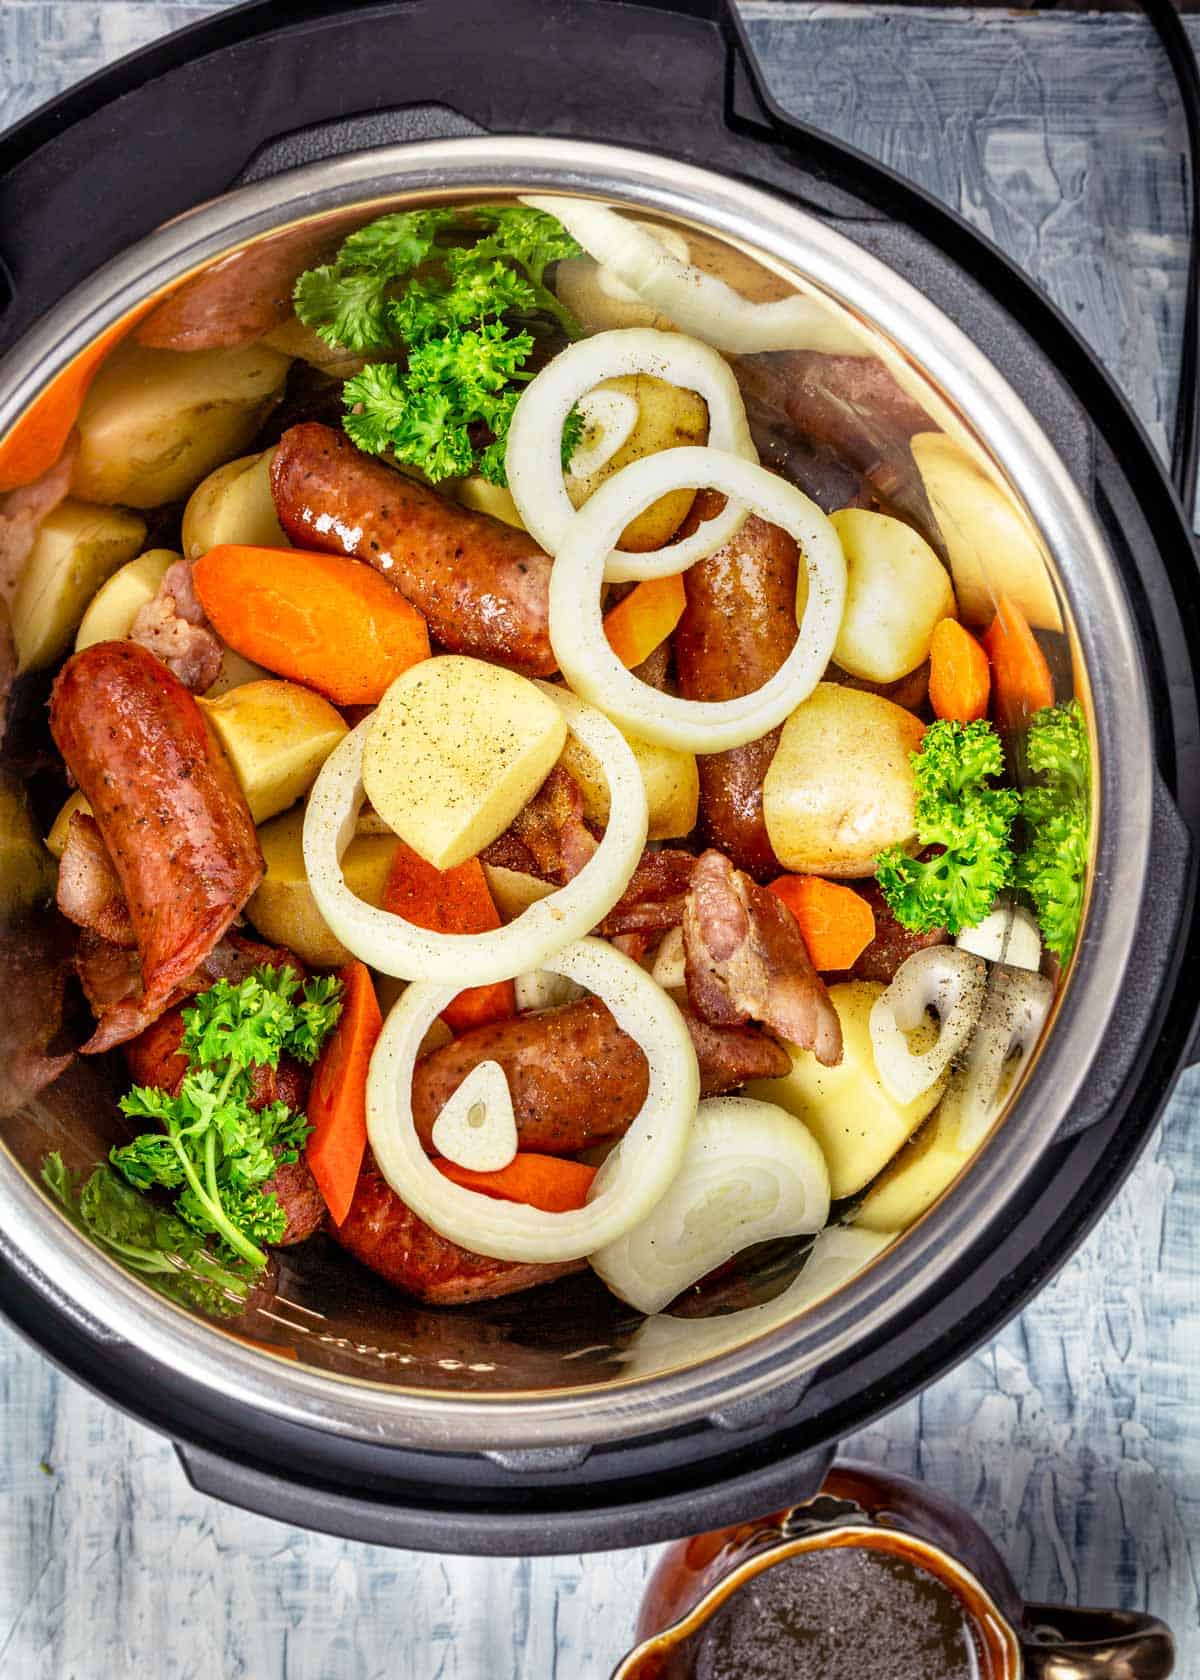 Potatoes, garlic, onions, carrots, and parsley added to the sausages and bacon in an Instant Pot.